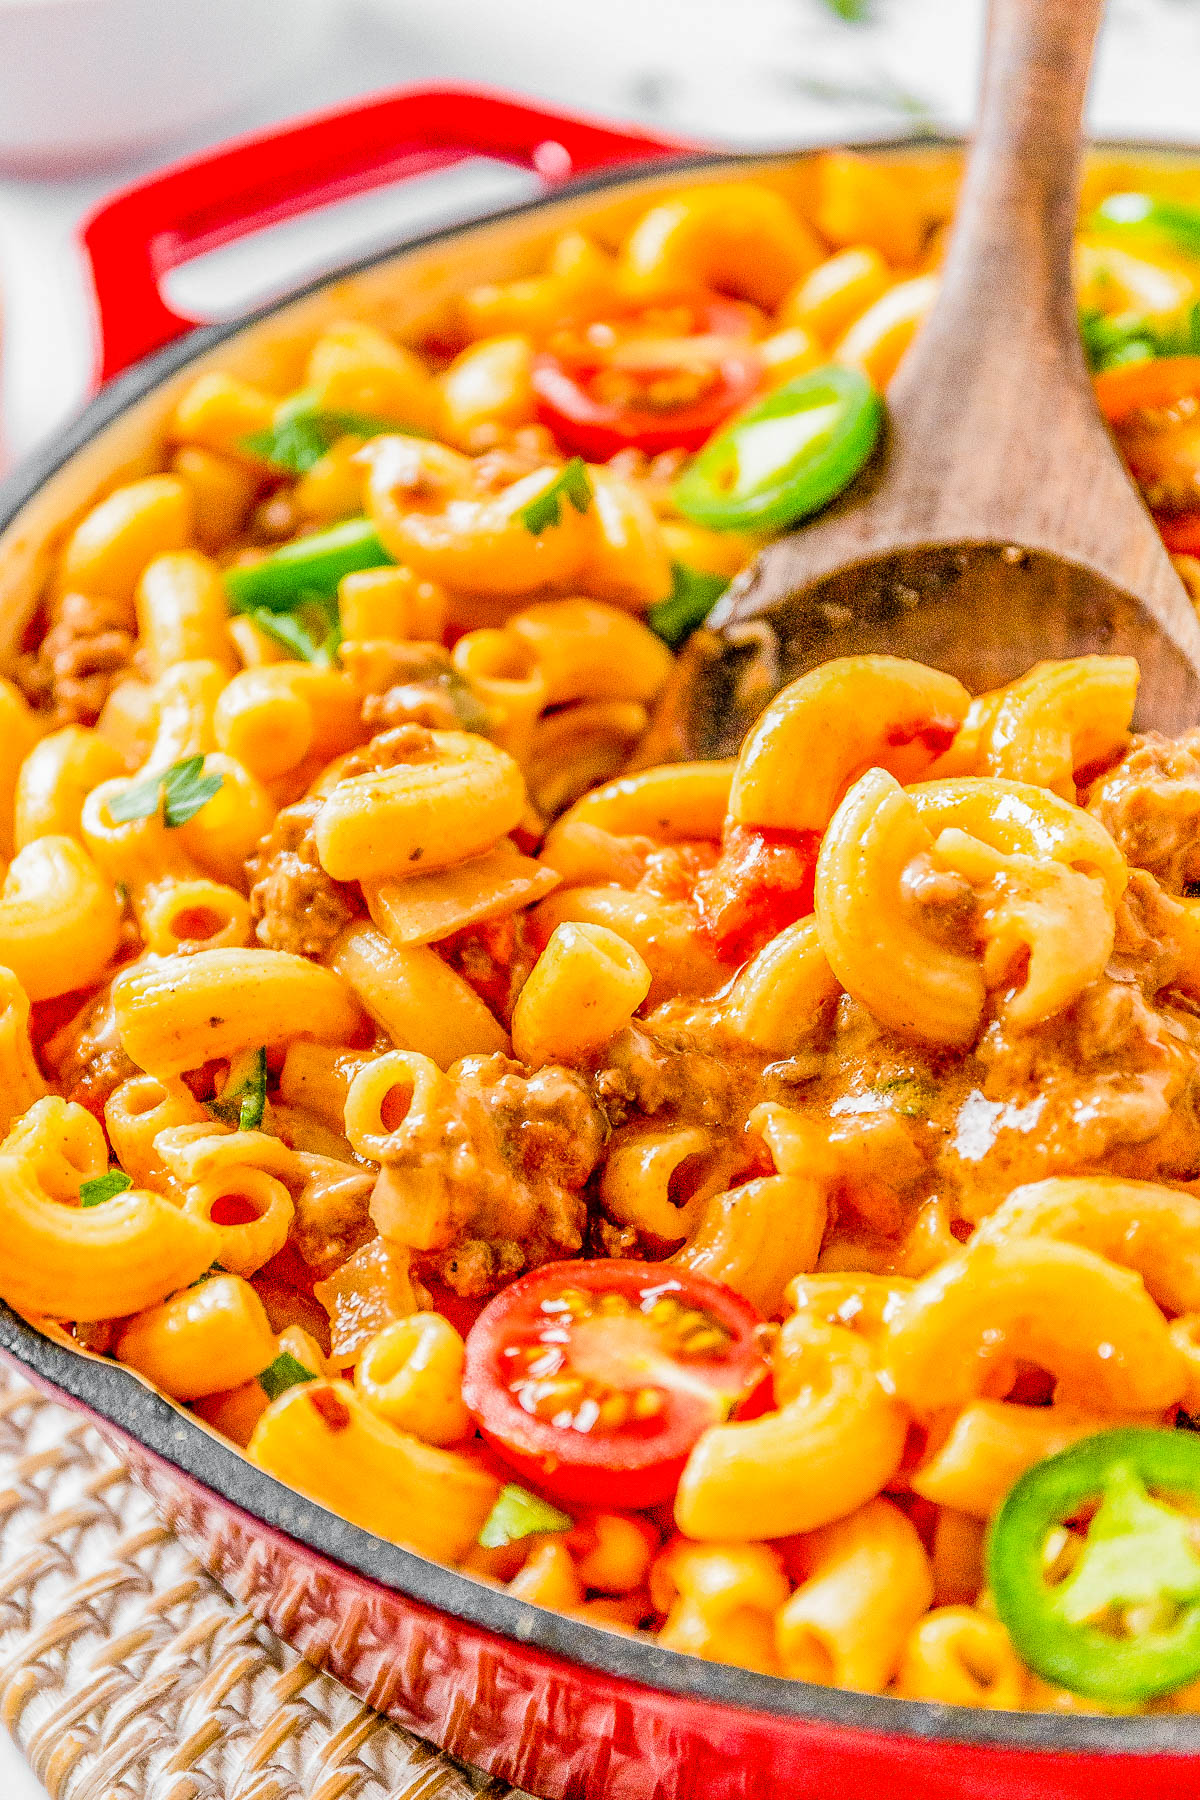 A skillet of creamy macaroni pasta with ground meat, sliced cherry tomatoes, and jalapeños, served with a wooden spoon.